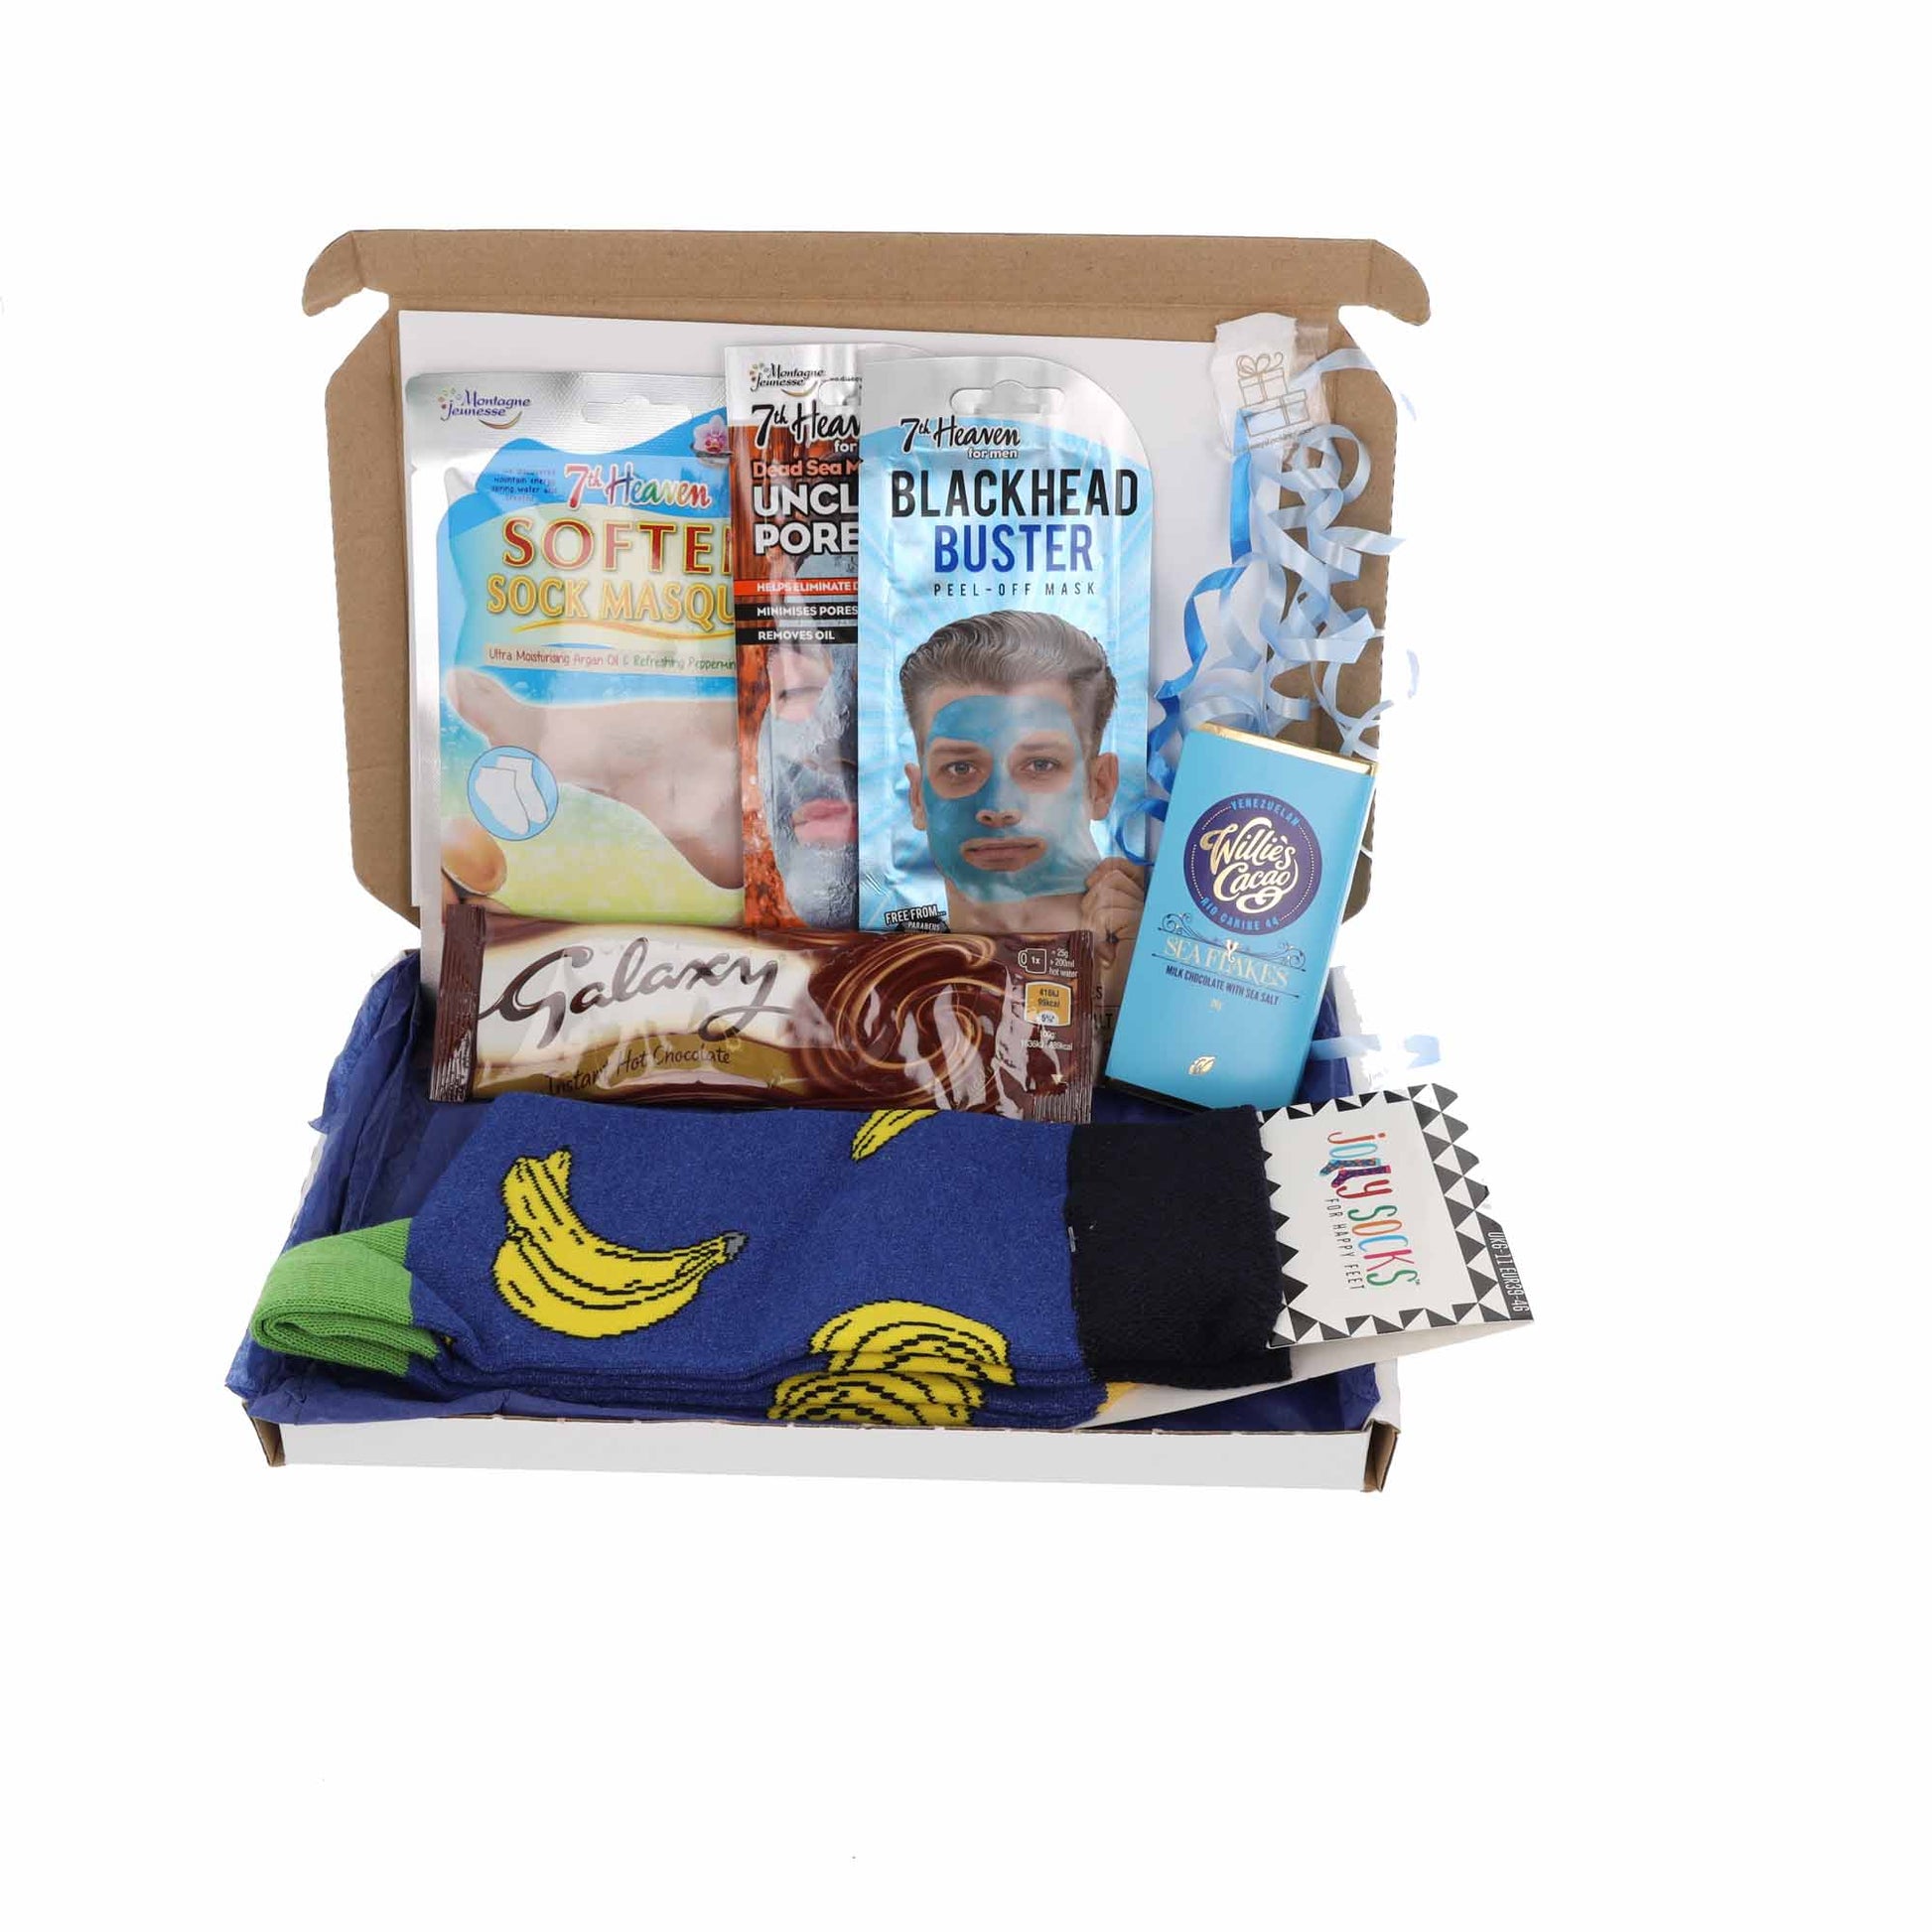 Dad To Be Pamper & Hot Drink Letterbox Congratulations Gift Box  - Always Looking Good -   